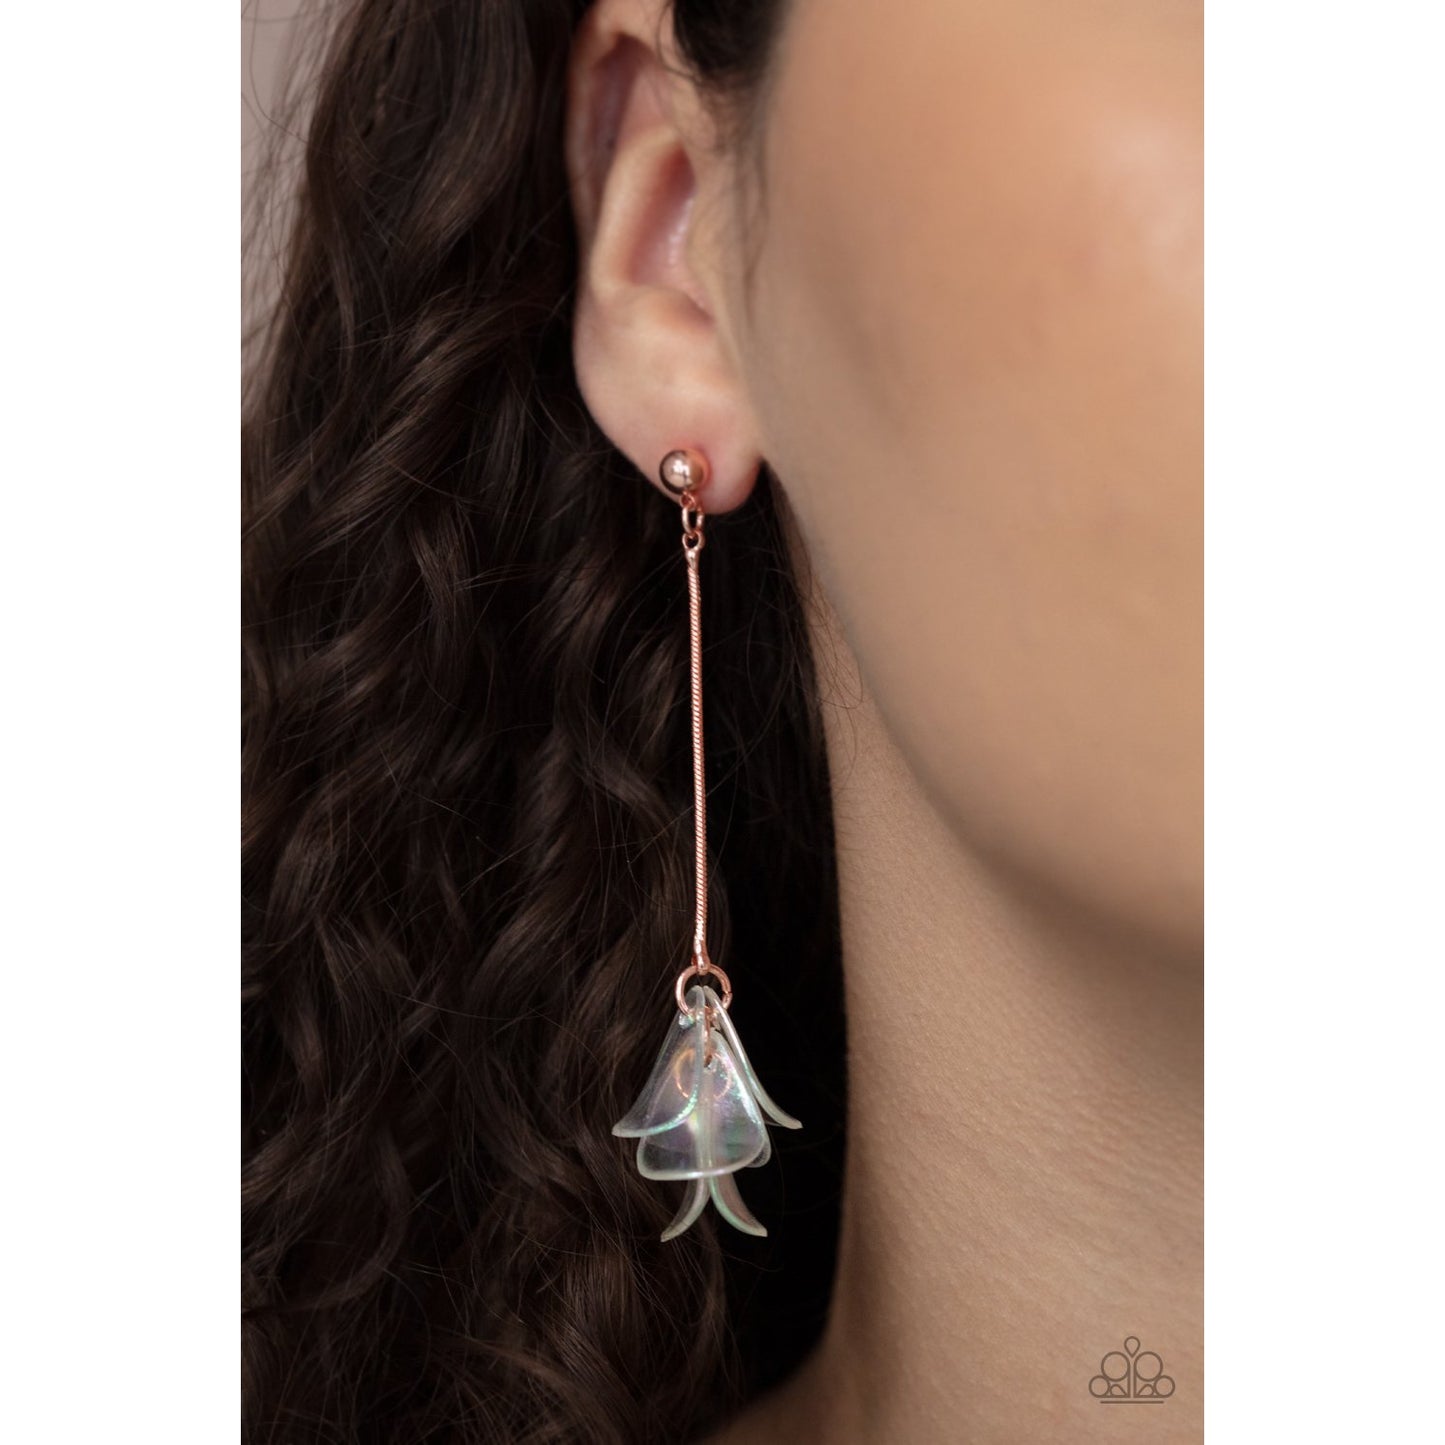 Keep Them In Suspense - Copper Iridescent Acrylic Earrings - Paparazzi Accessories - GlaMarous Titi Jewels